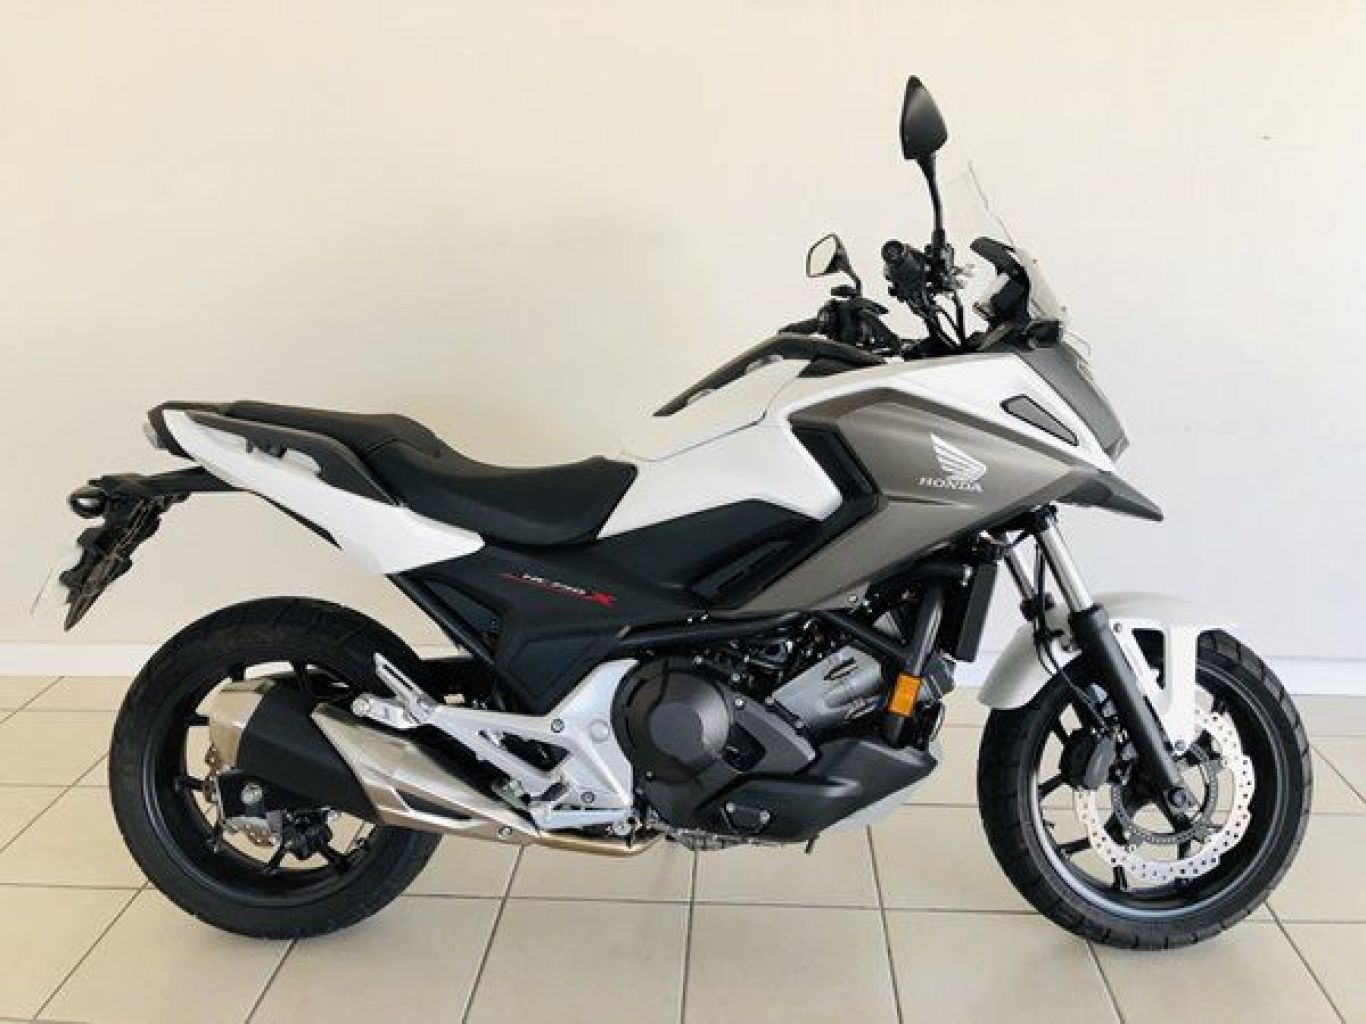 Used Honda NC750X with DCT transmission for sale